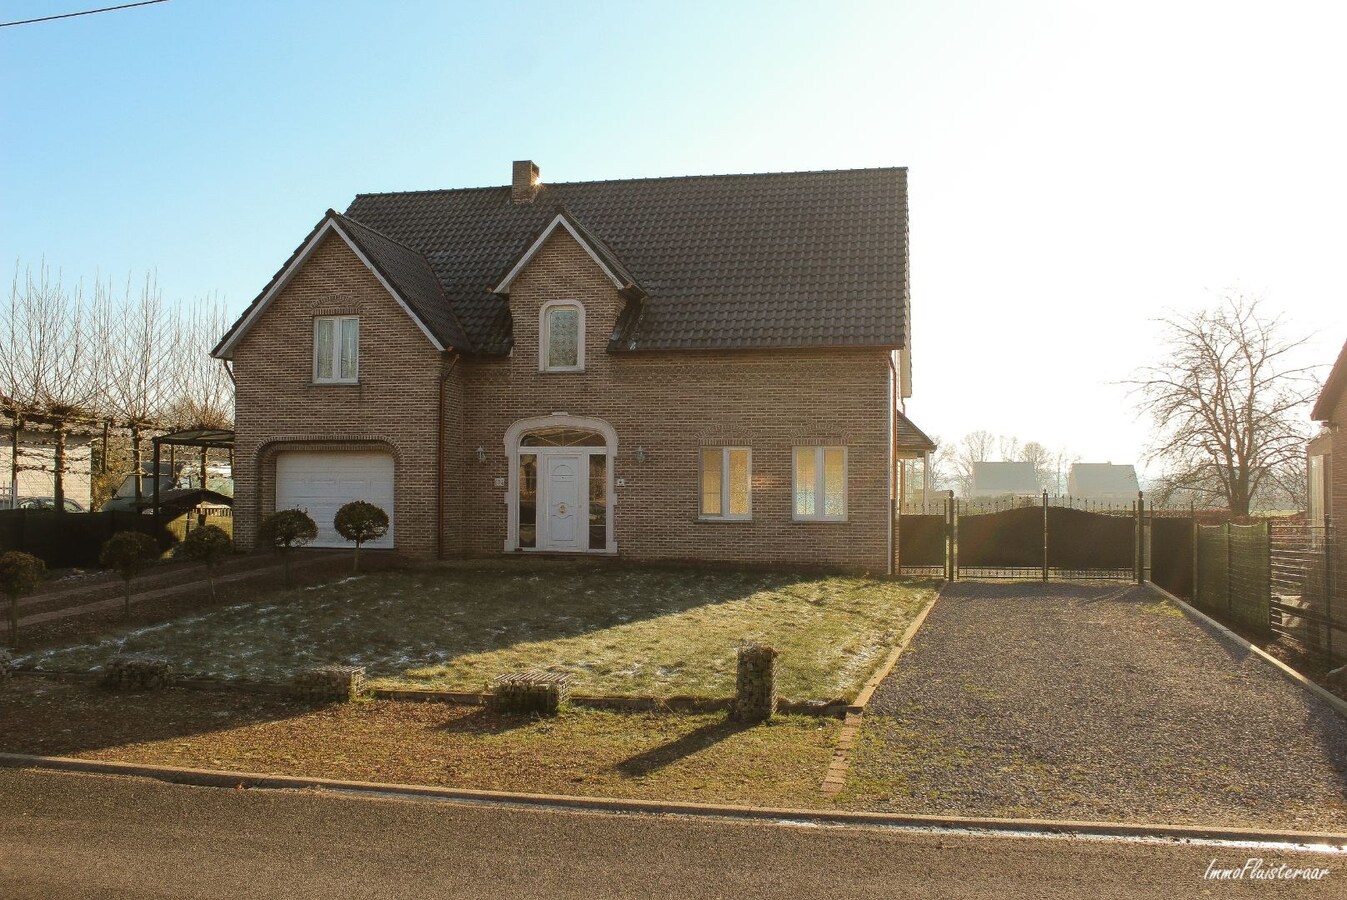 Spacious residential house on approximately 90 acres in Maaseik 